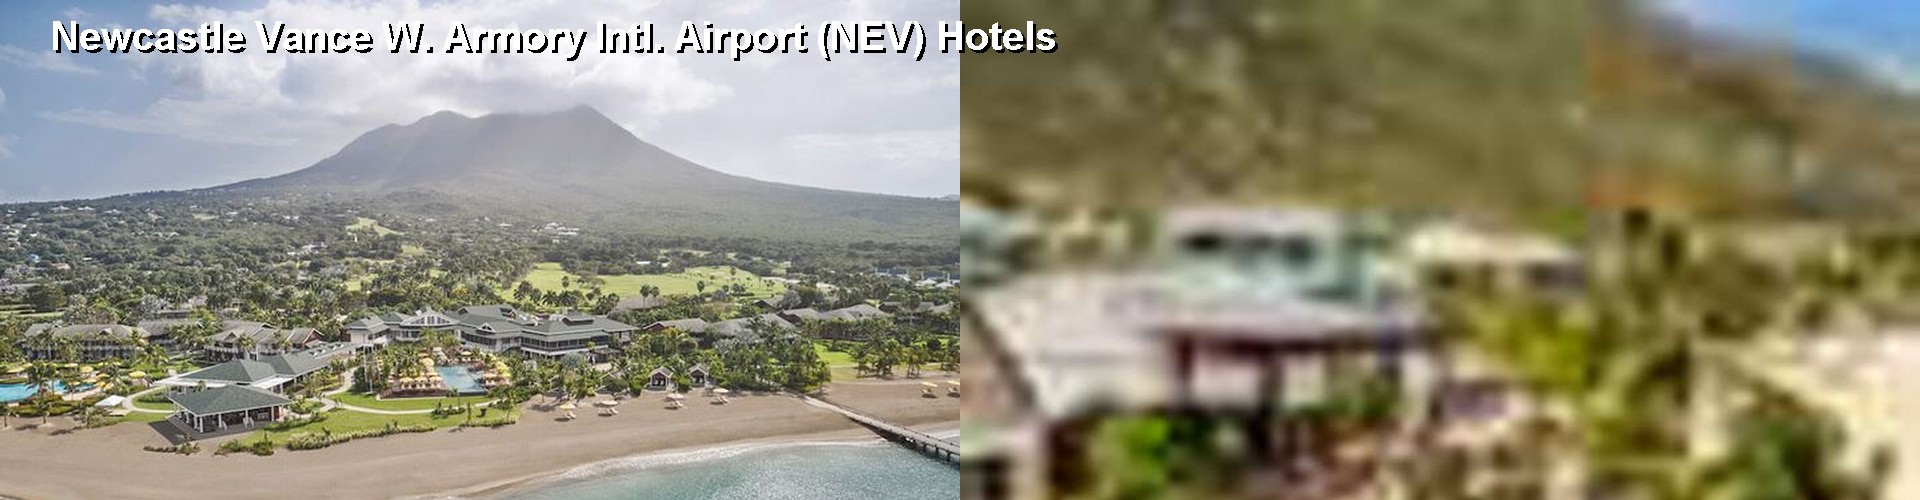 5 Best Hotels near Newcastle Vance W. Armory Intl. Airport (NEV)